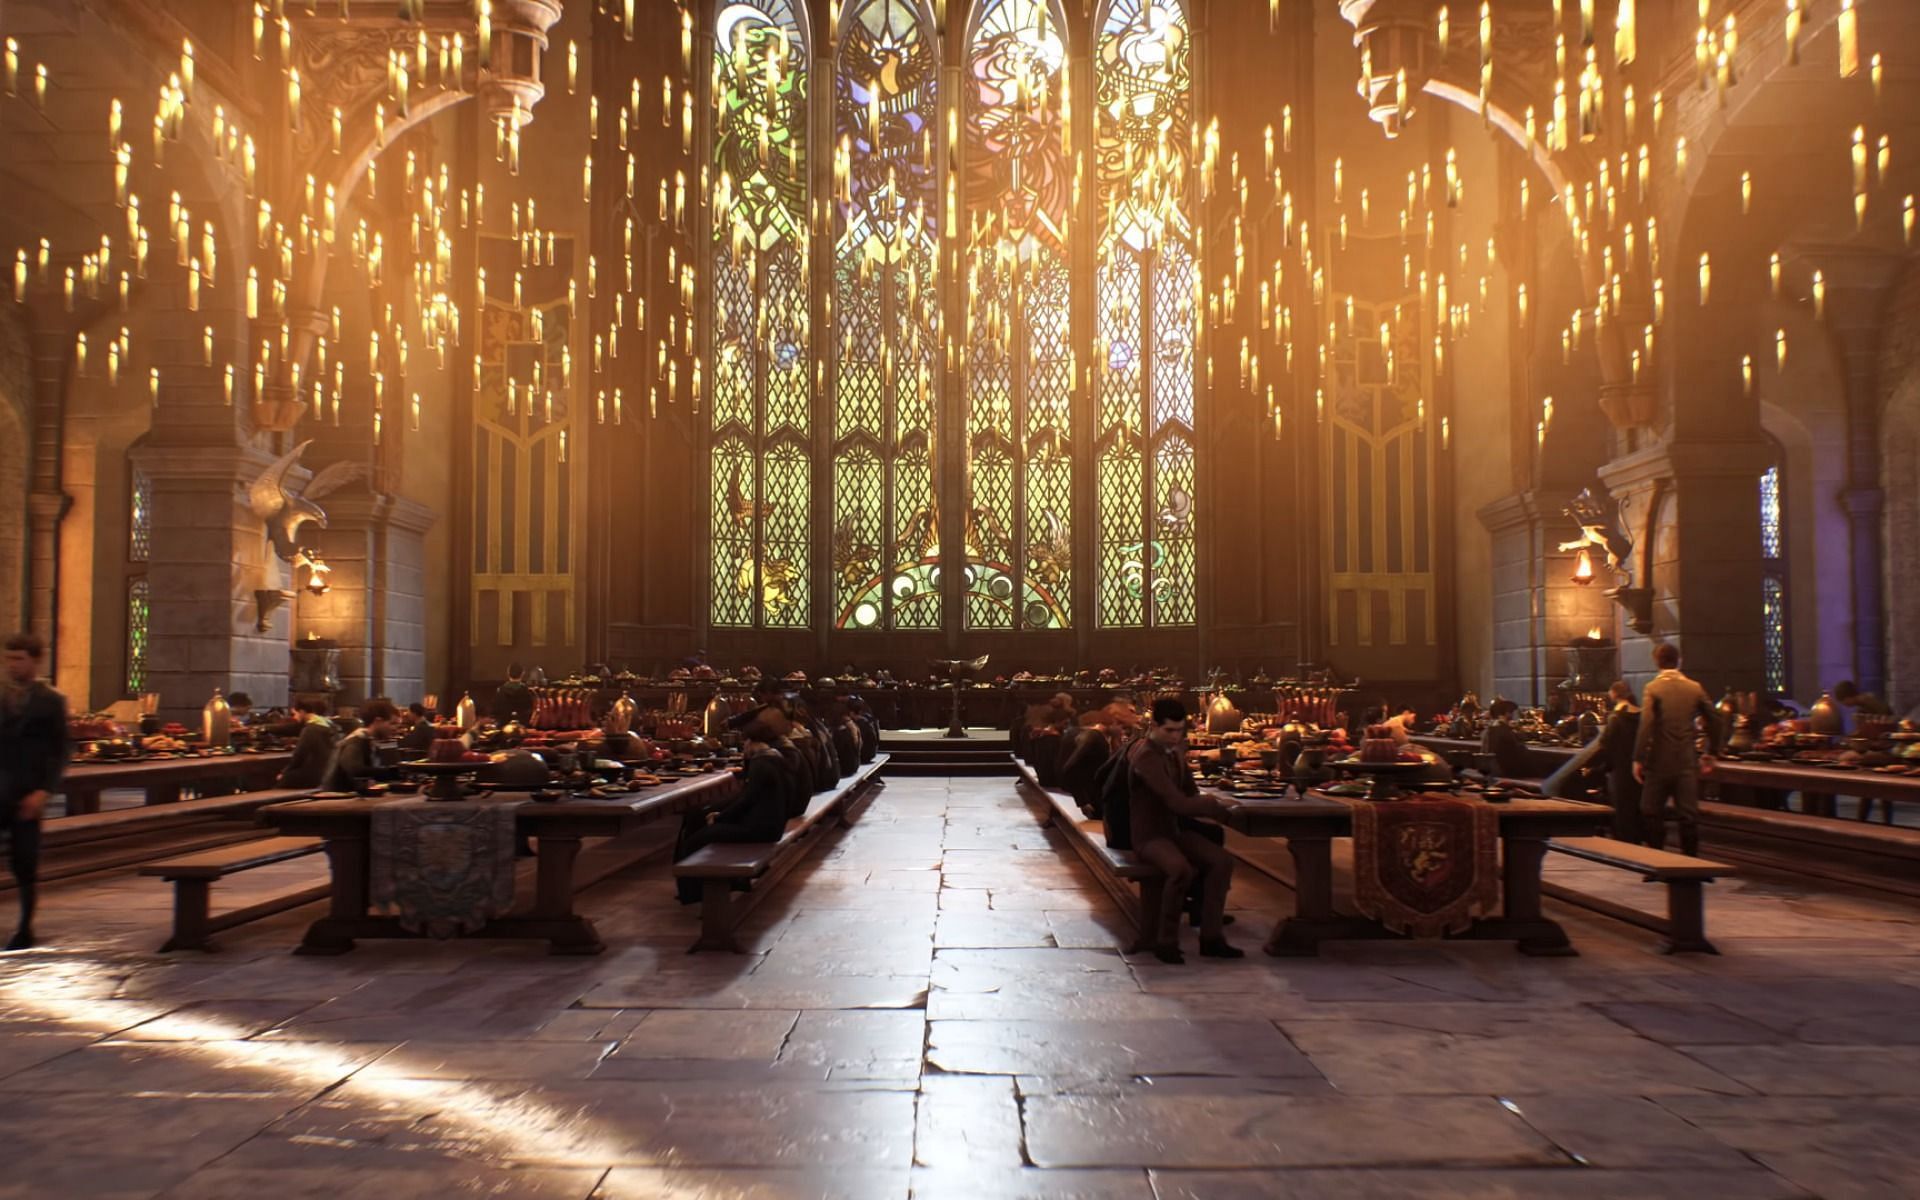 Fans are waiting to experience Hogwarts (Image via PlayStation)